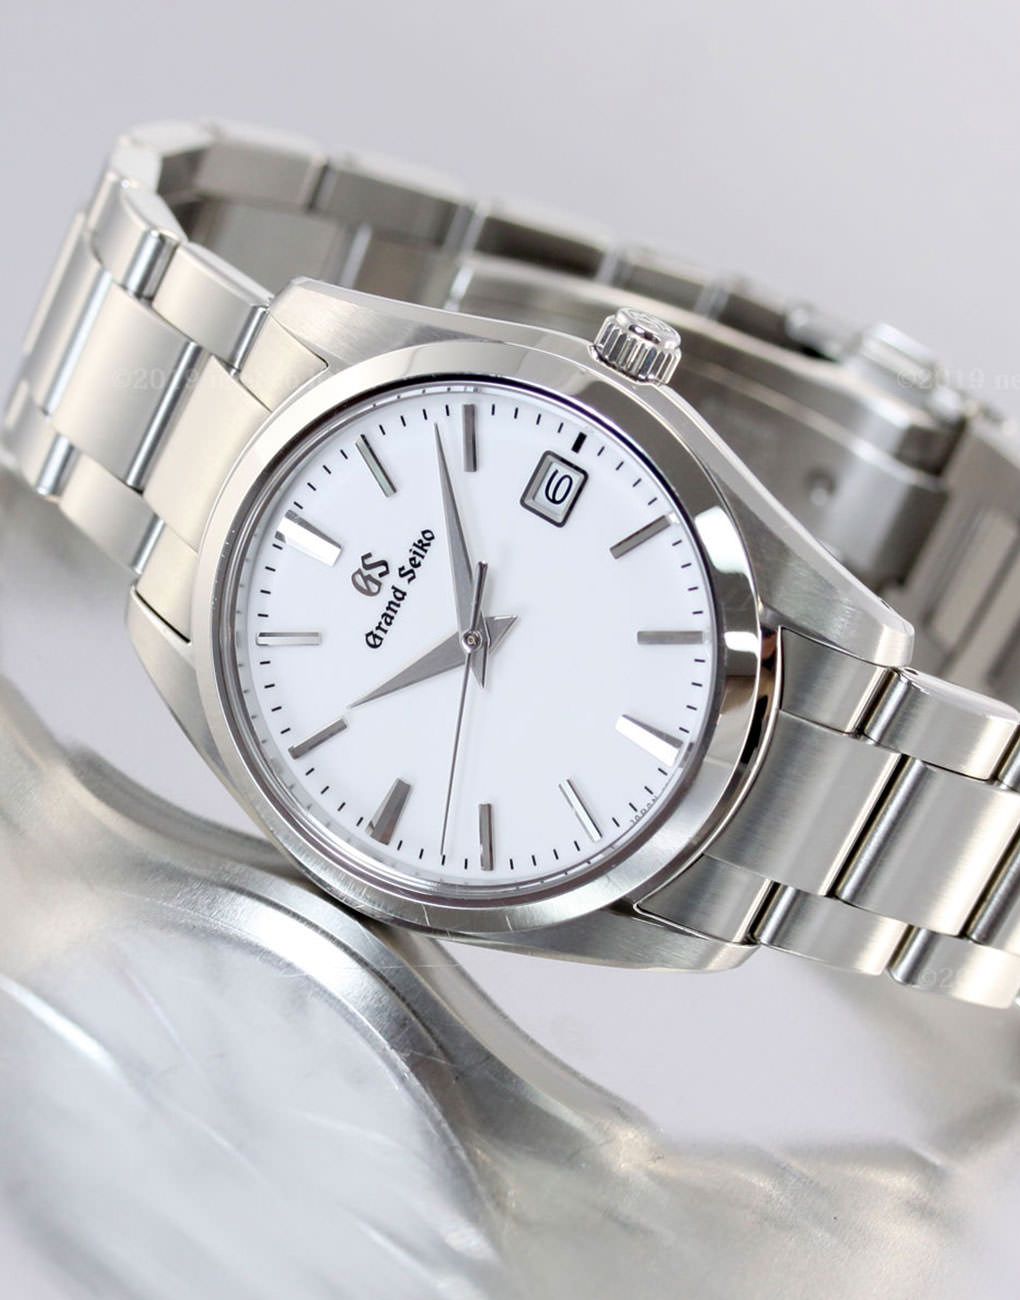 Why Grand Seiko Is Fast Becoming A Collectors' Darling The World Over